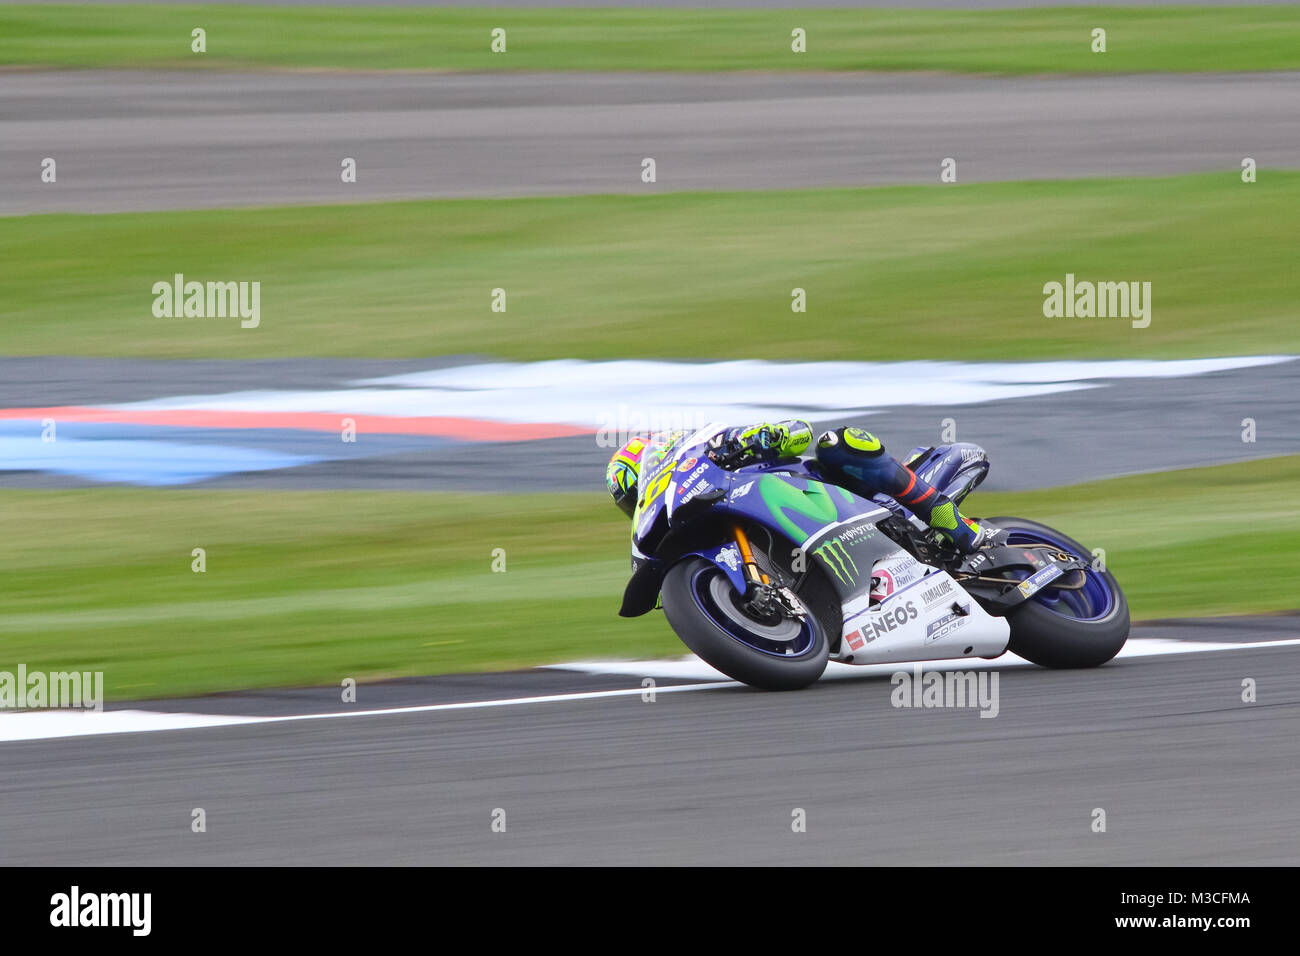 Valentino Rossi exiting Beckets corner and winding up for the Hanger straight during Friday Free Practice at the MotoGP British Grand Prix 2016 Stock Photo